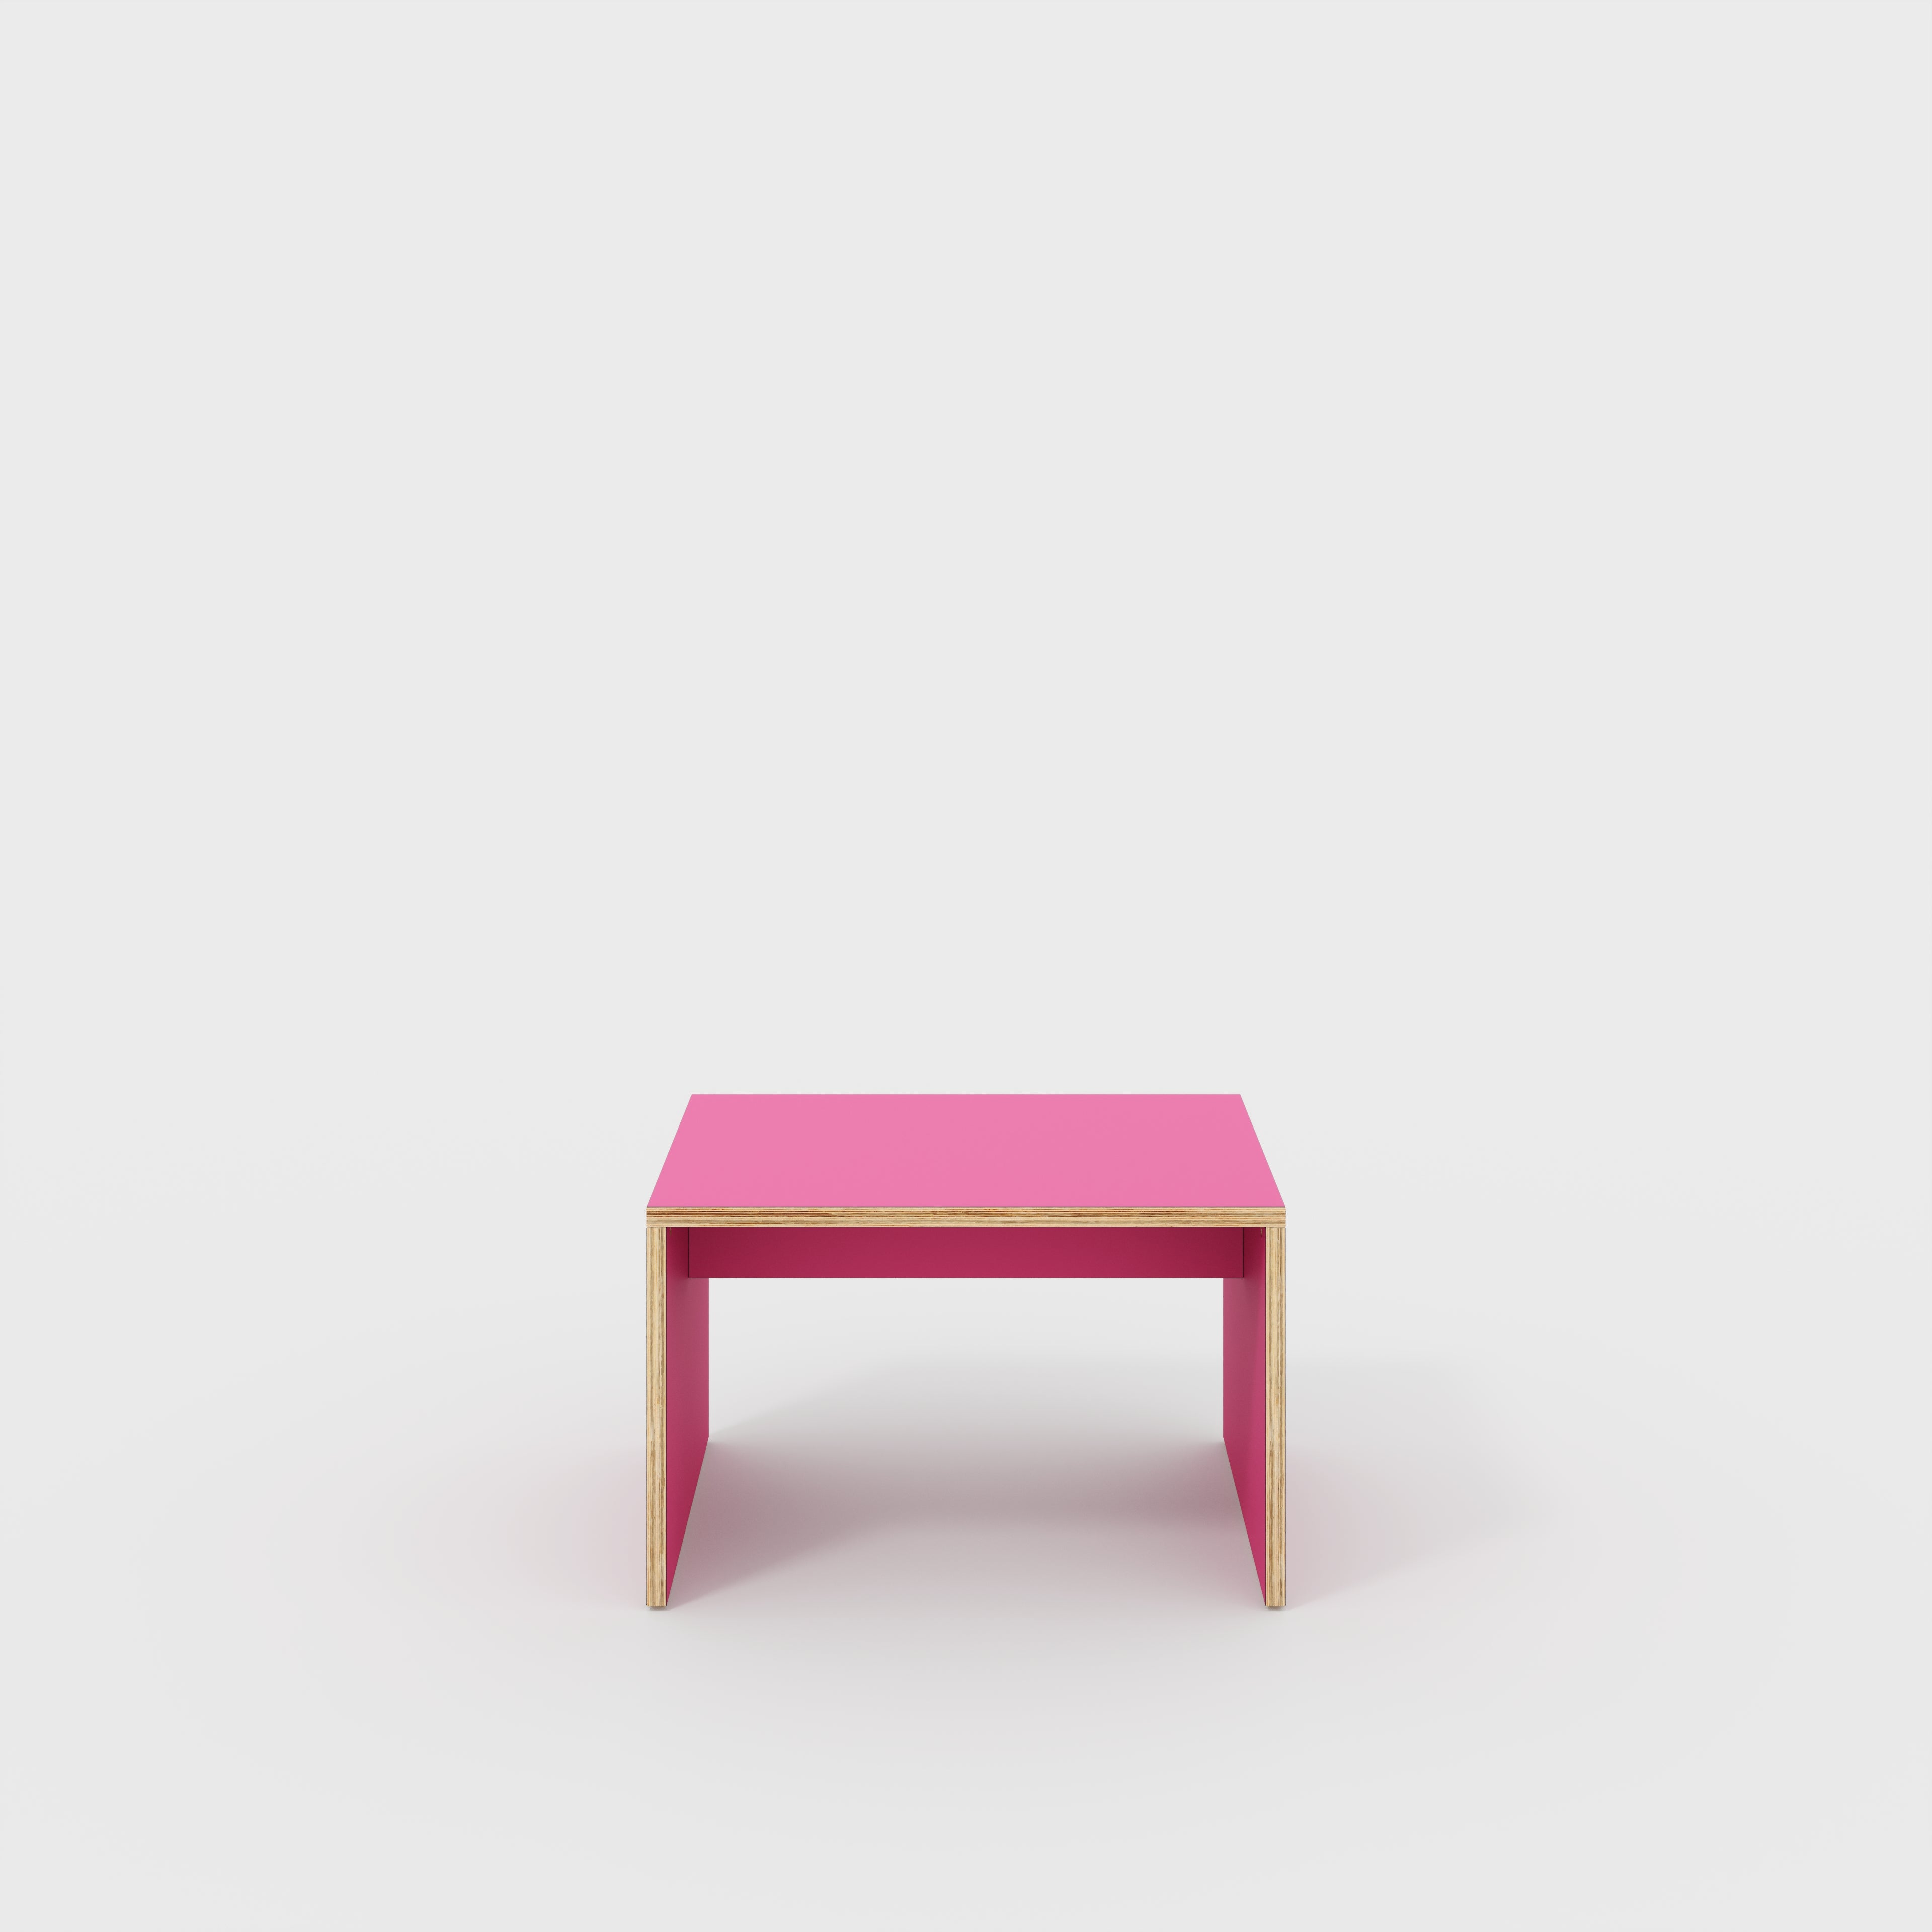 Kids Table with Solid Sides - Formica Juicy Pink - 800(w) x 600(d) x 500(h)